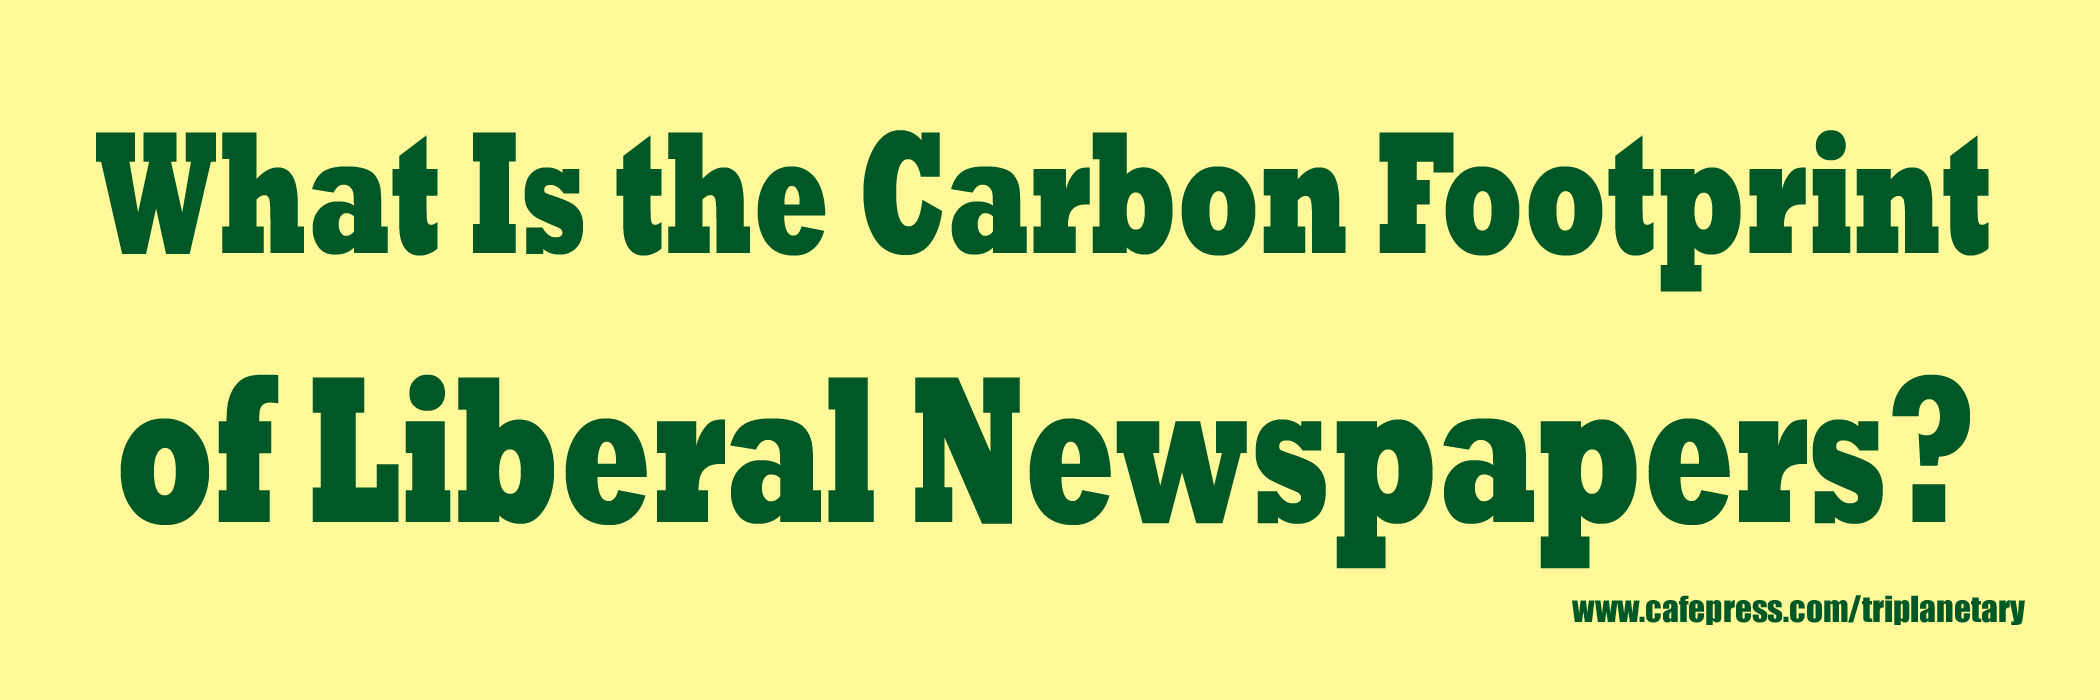 Yellow and green image of bumper sticker: 'What is the Carbon Footprint of Liberal Newspapers?'